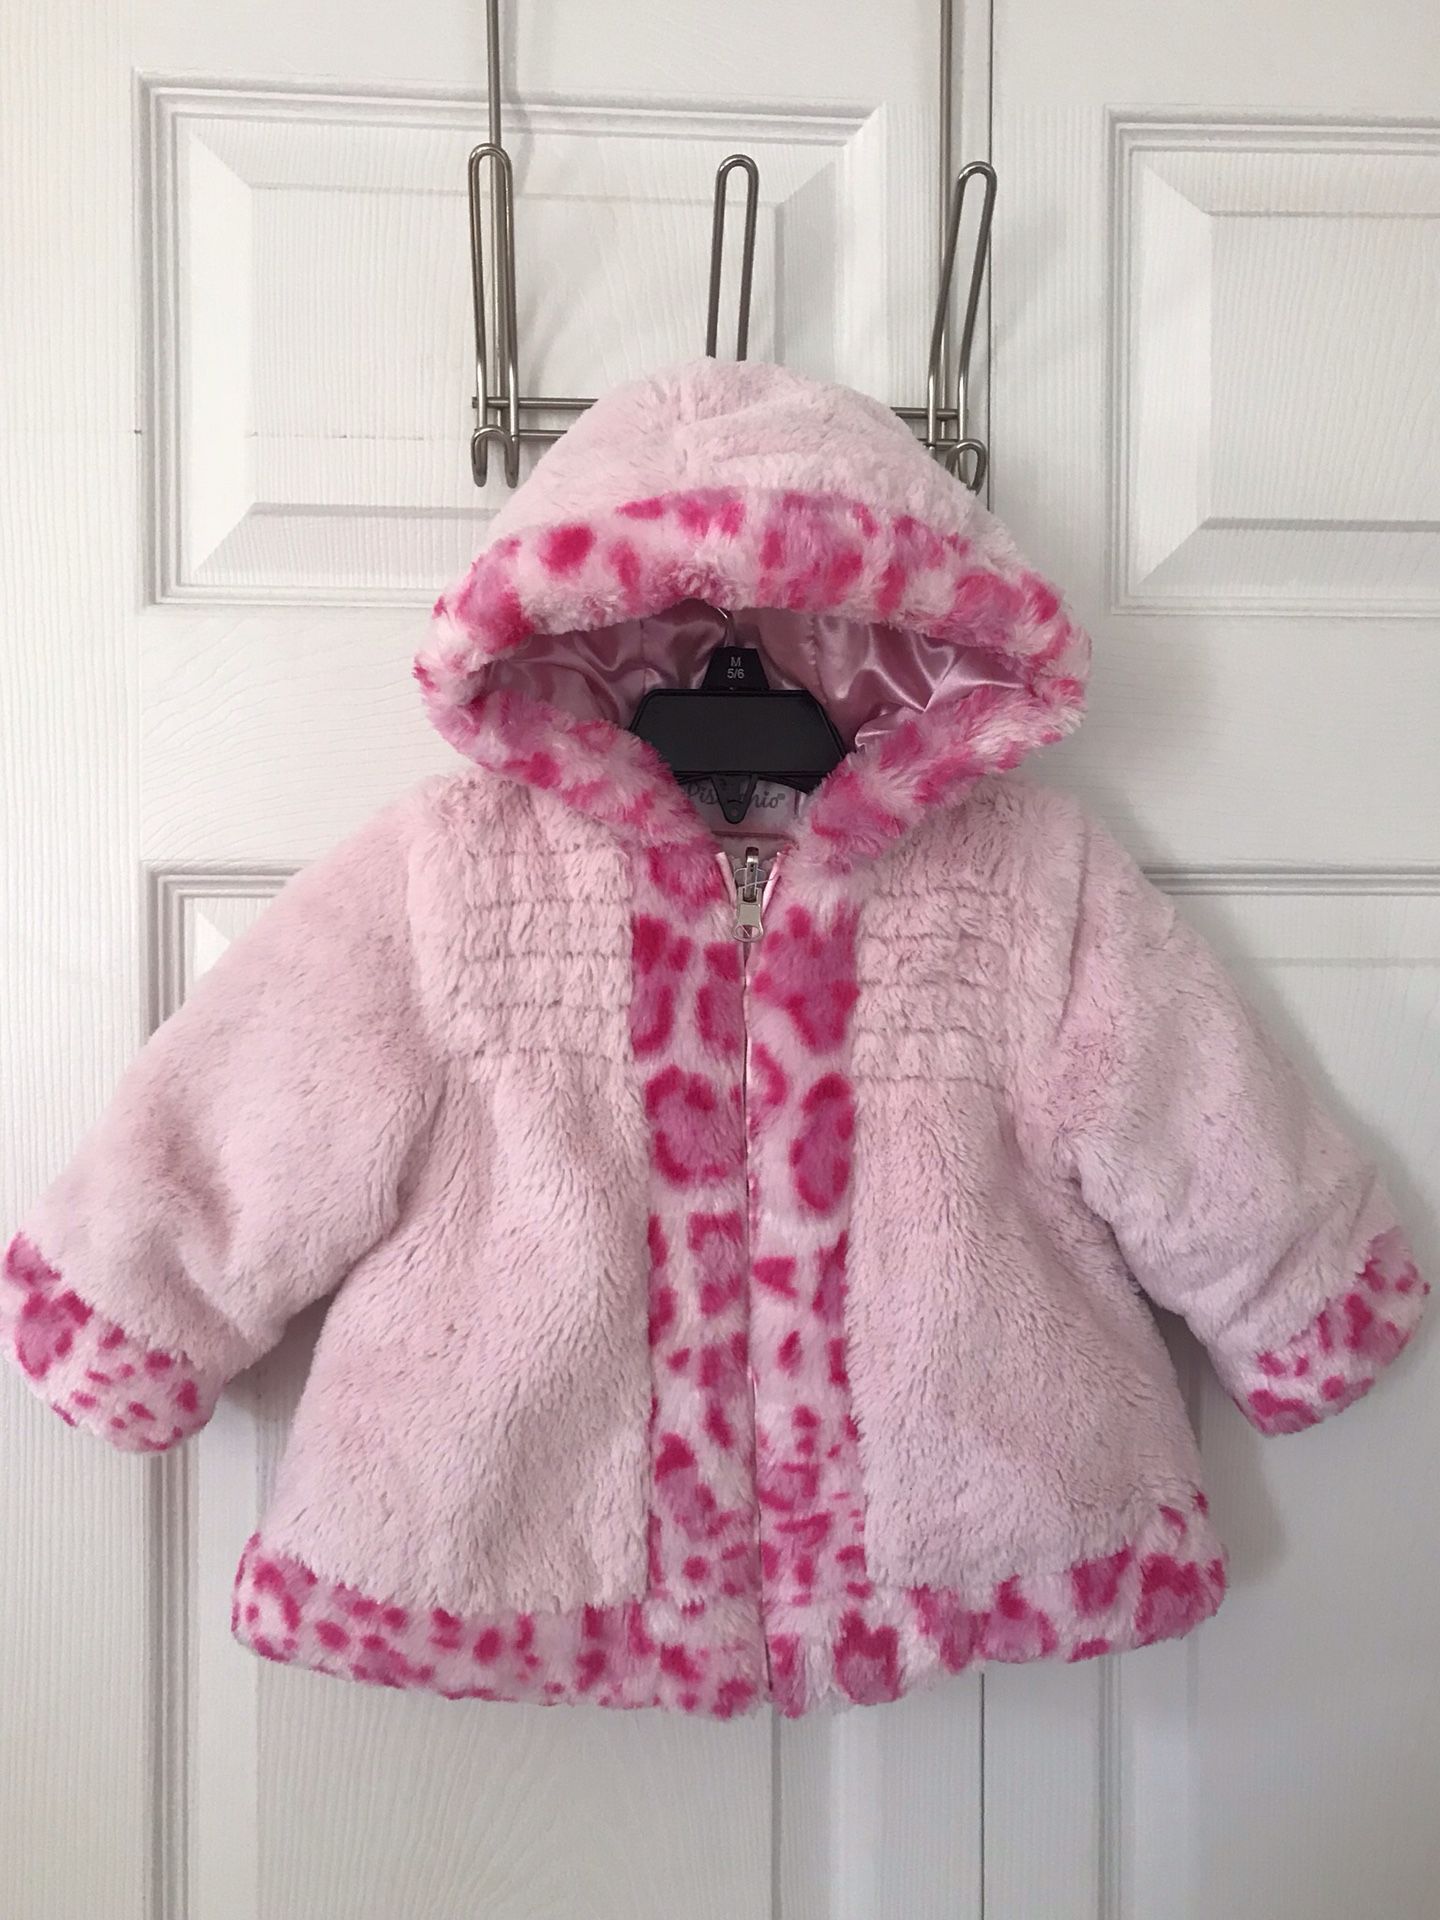 Pistachio girls winter coat. size 12m in excellent condition (pick up only)